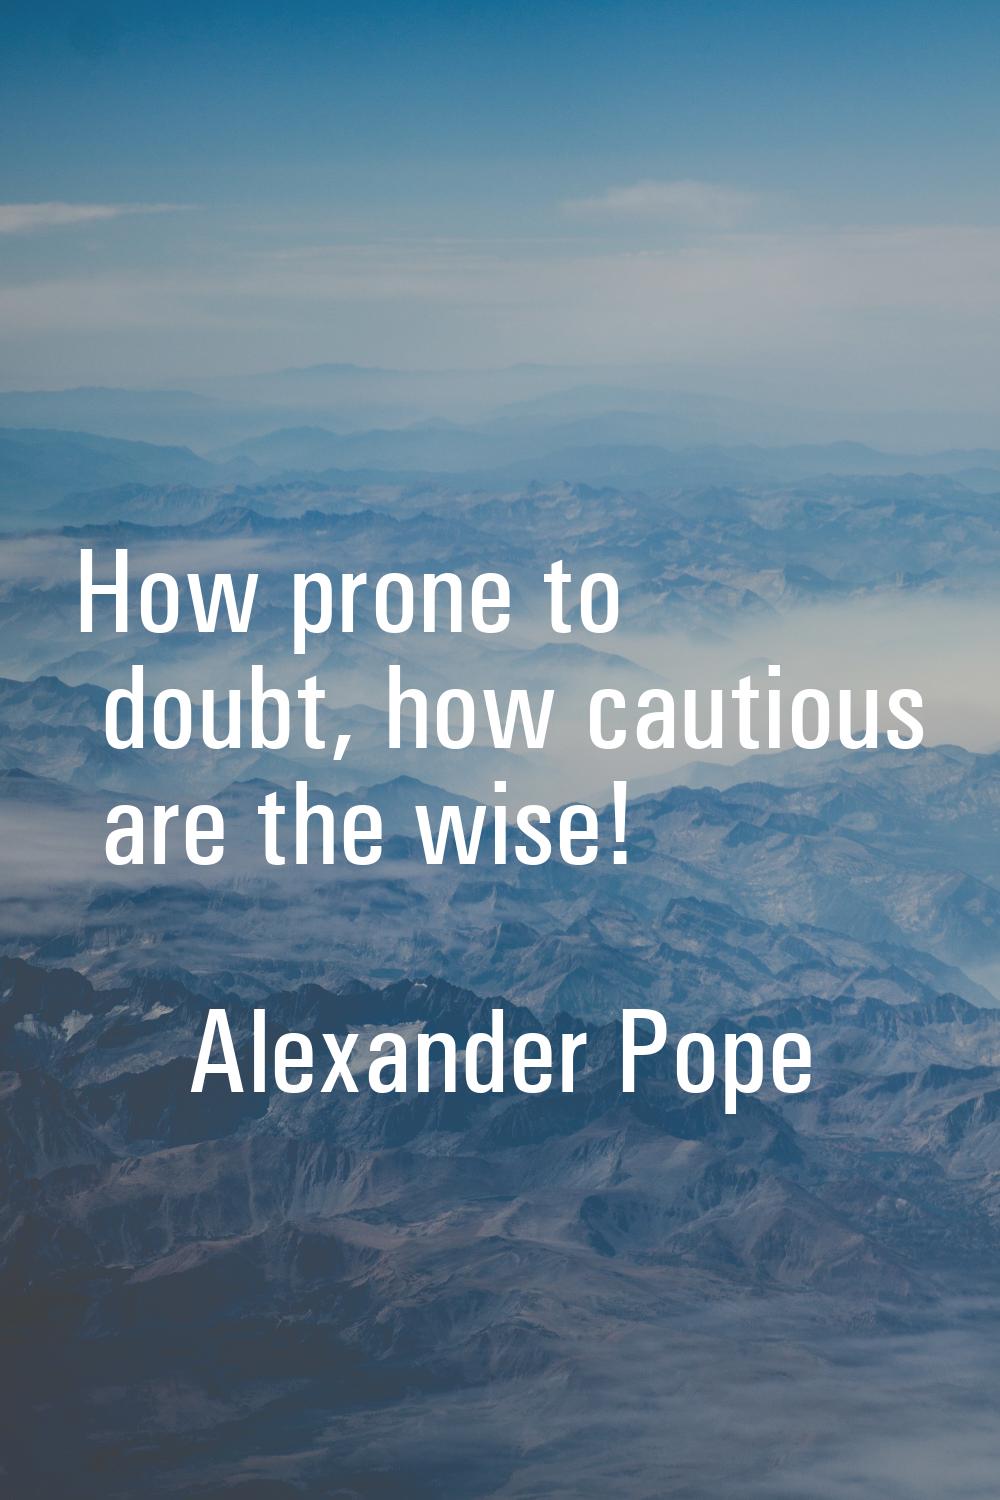 How prone to doubt, how cautious are the wise!